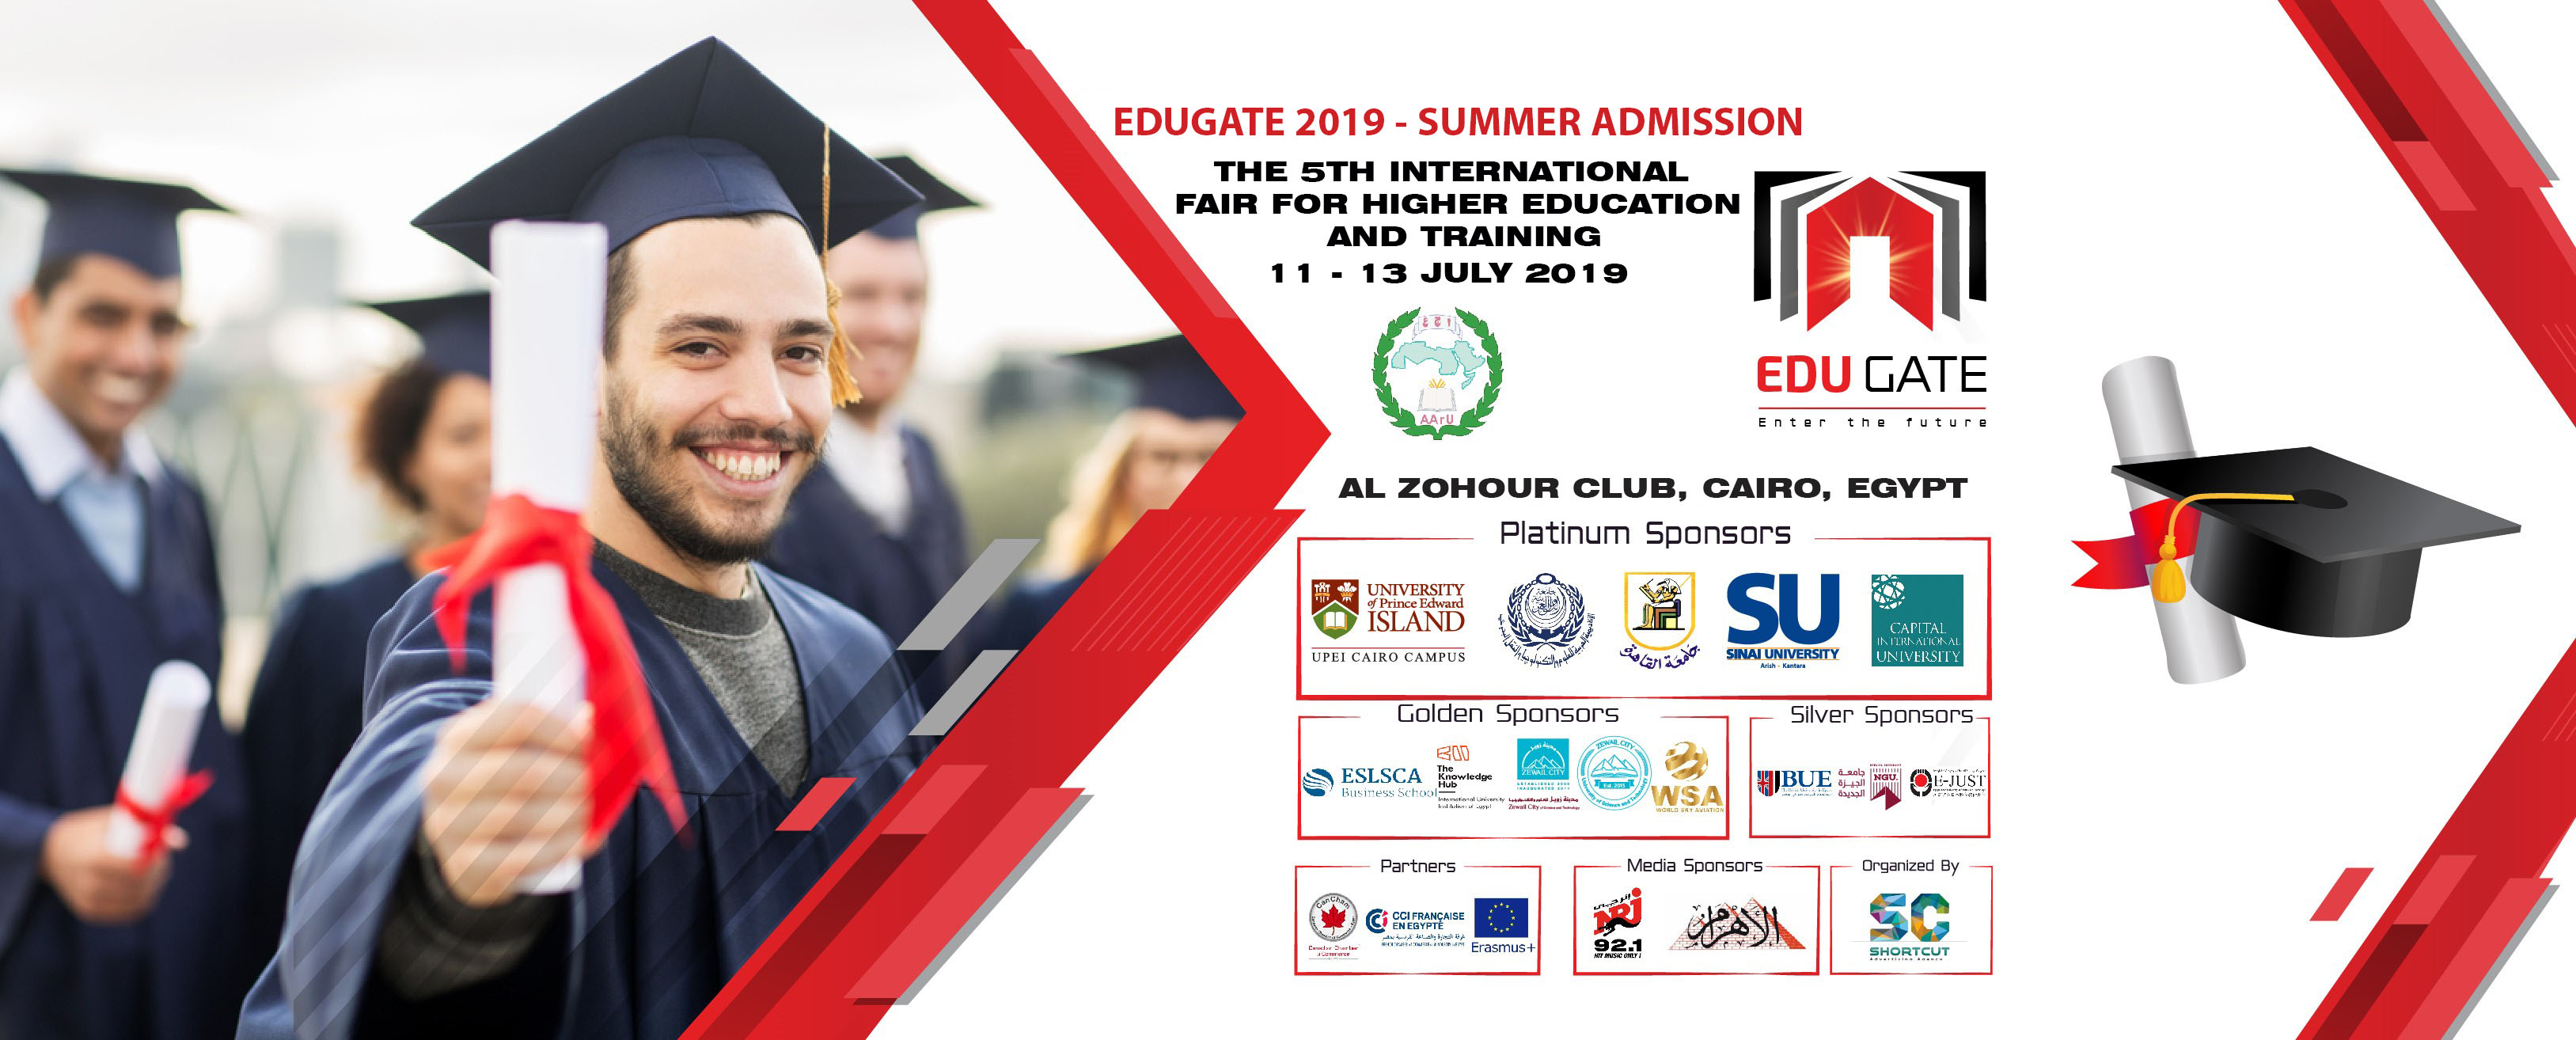 The 5th International Fair for Higher Education and Training.